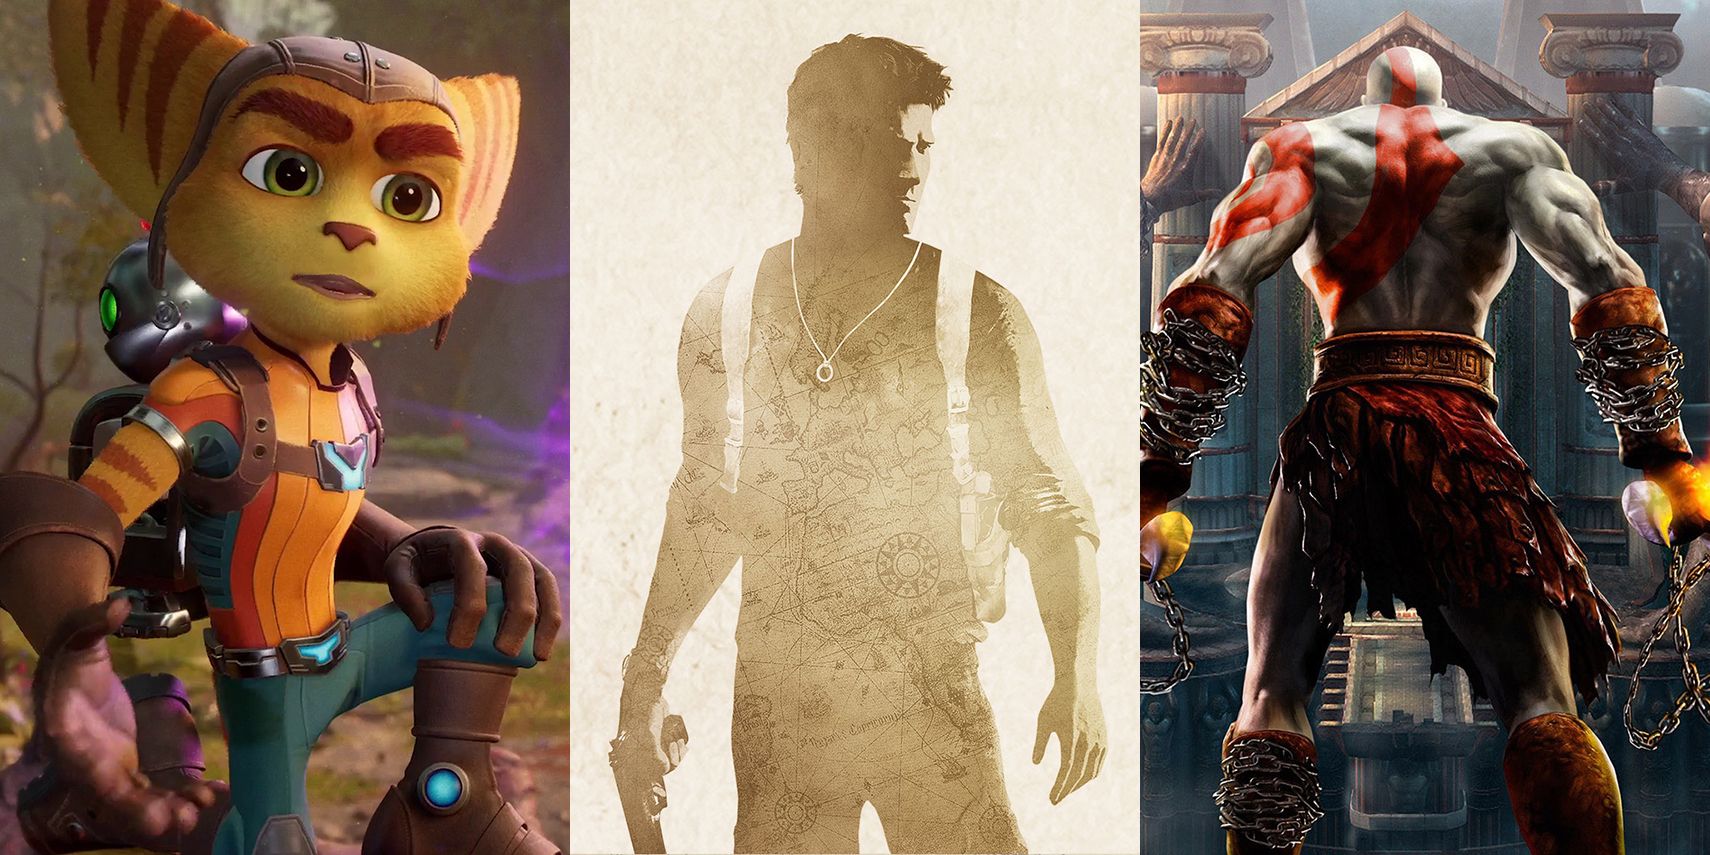 The PlayStation 4 exclusives we want to see on PC